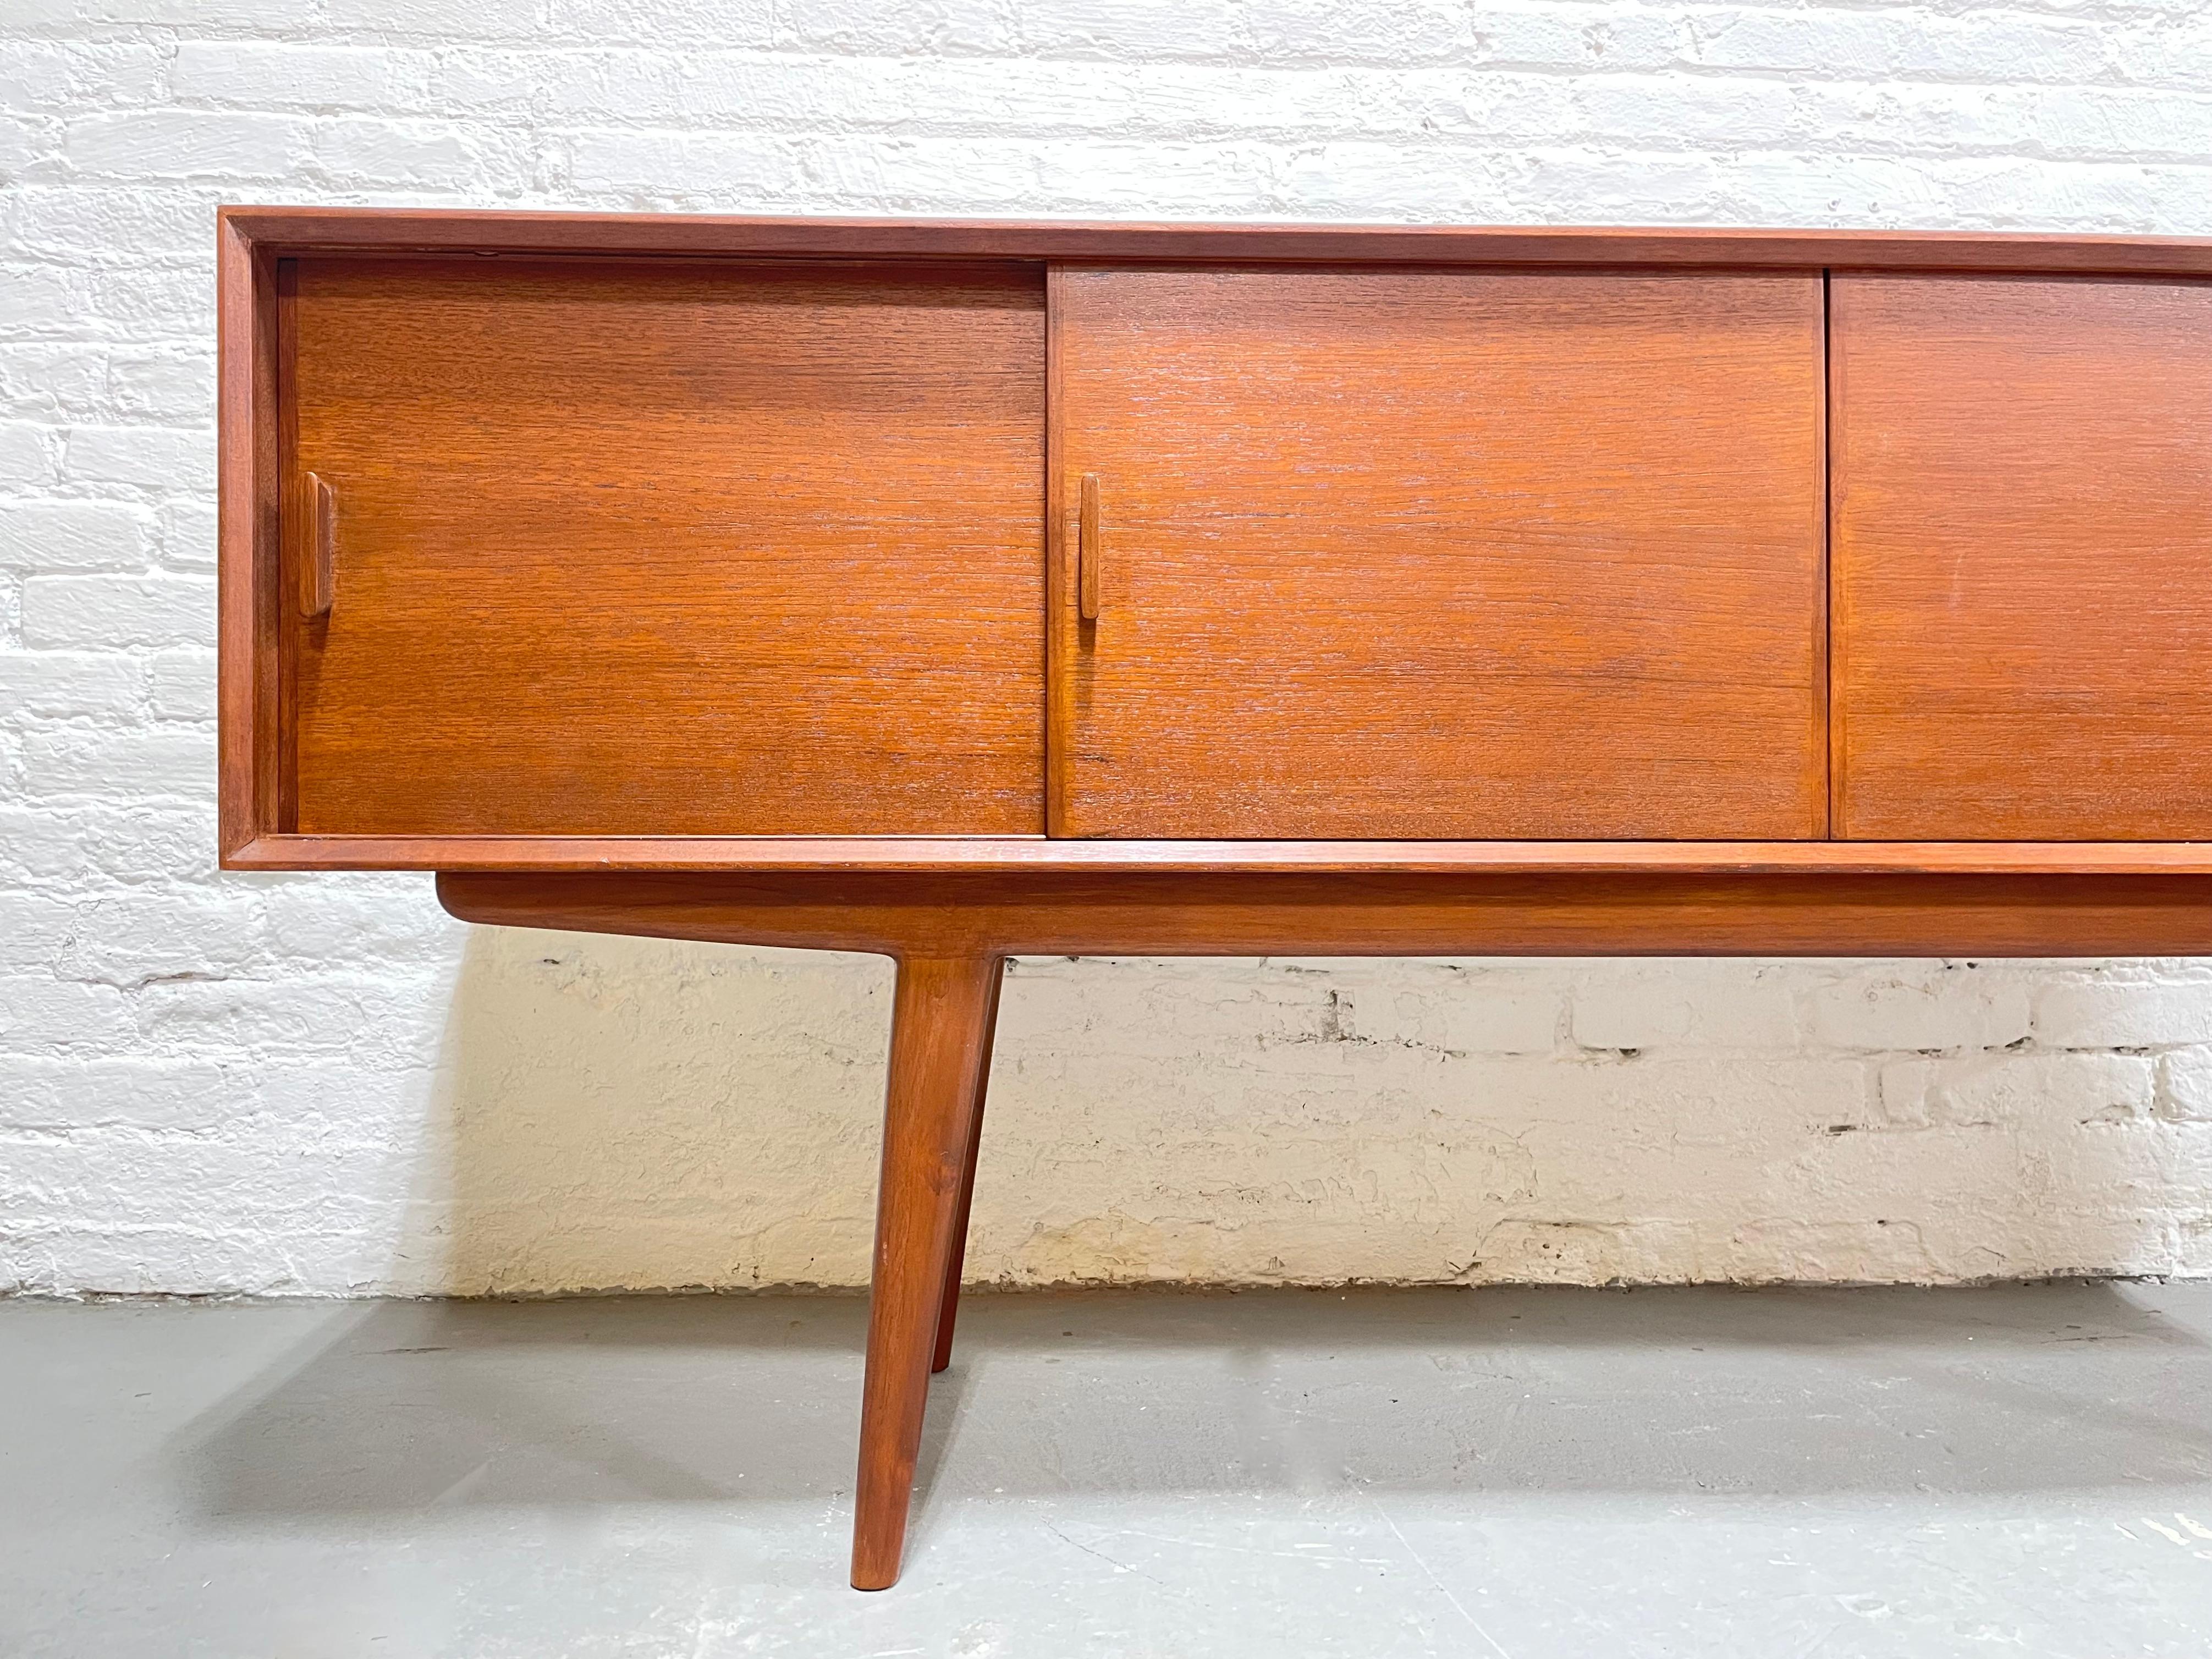 Wood LONG + Sleek Handmade Mid Century MODERN styled CREDENZA media stand For Sale